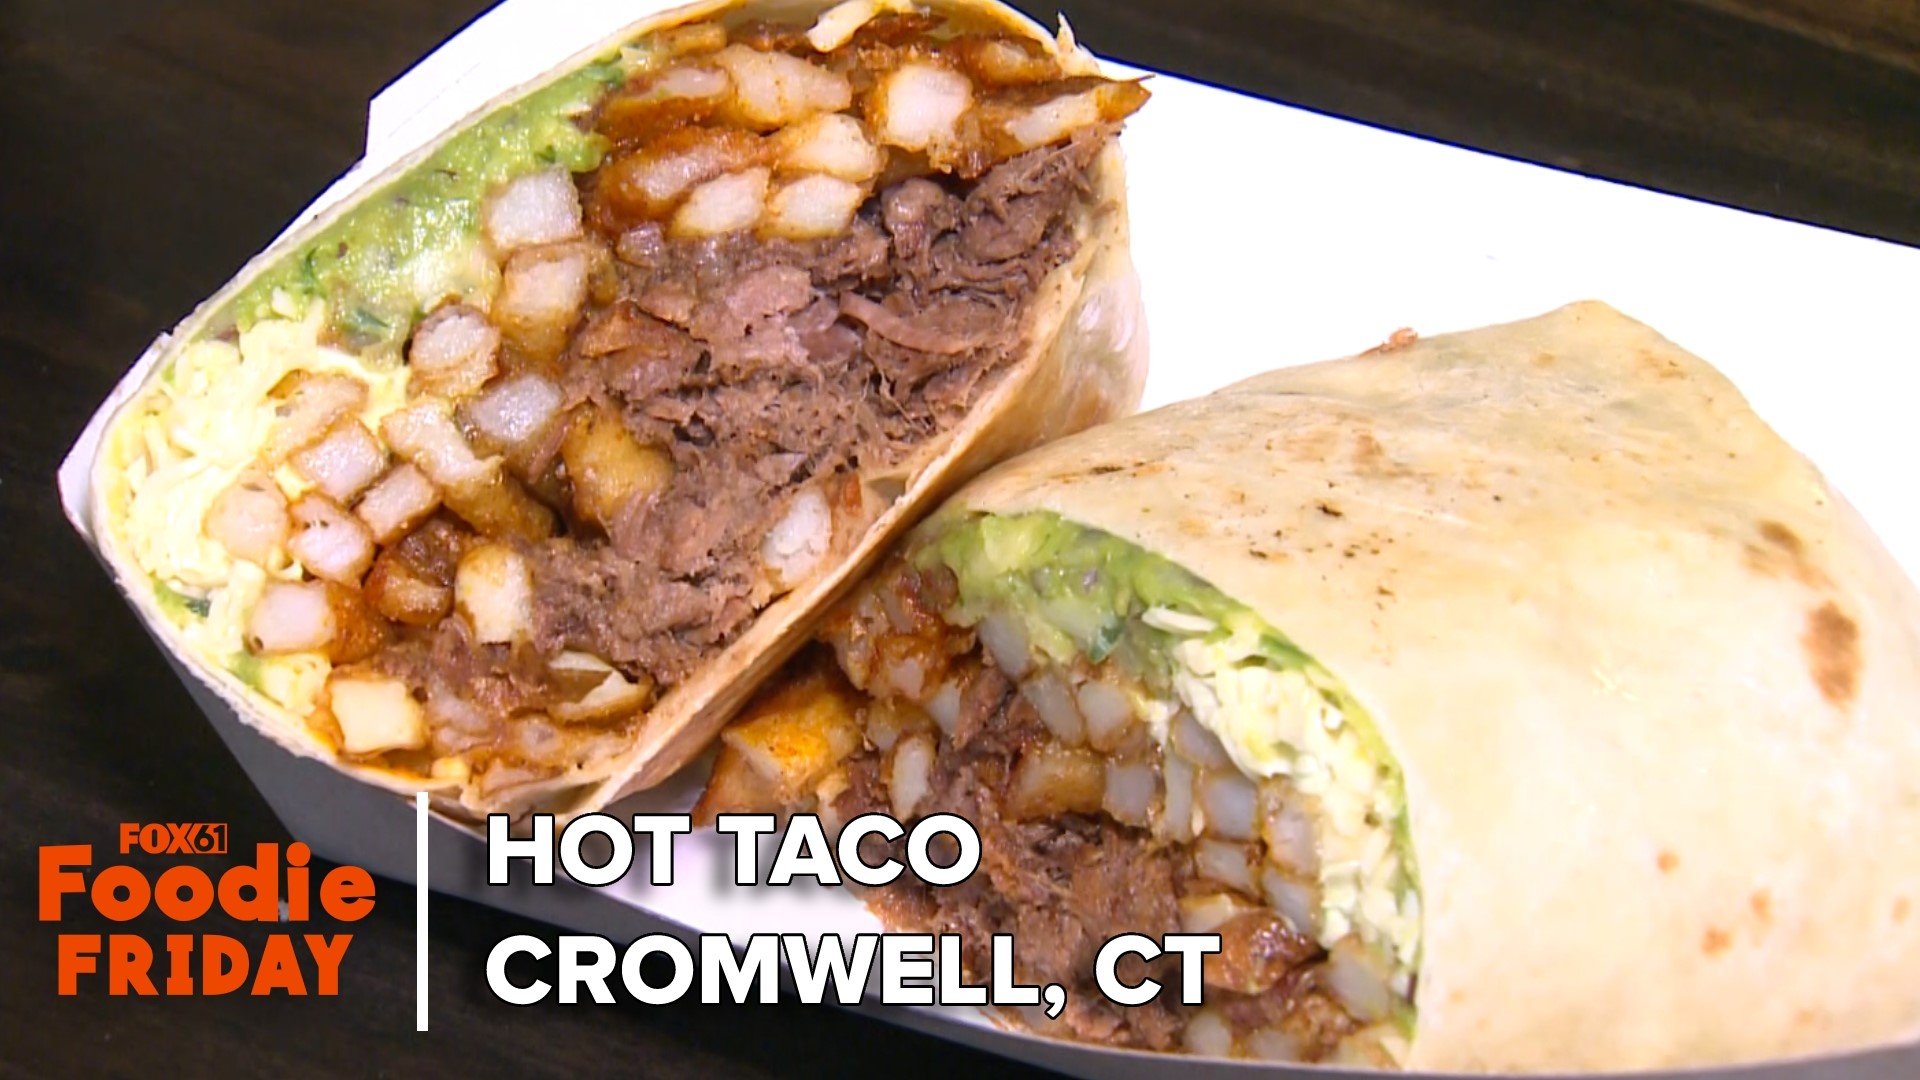 FOX61's Matt Scott sampled the tacos and dishes that are outside the box in downtown Cromwell's Hot Taco.